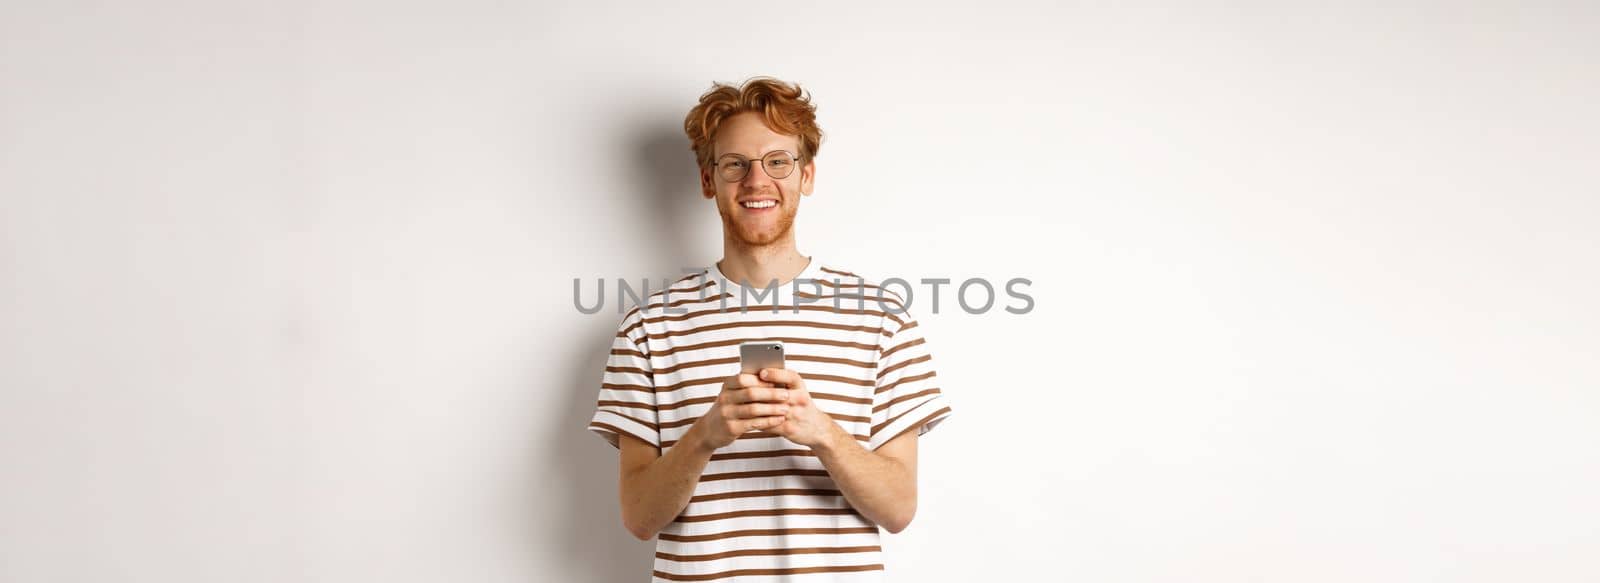 Technology and e-commerce concept. Redhead guy in glasses using mobile phone and smiling. Young man with smartphone staring happy at camera, white background.